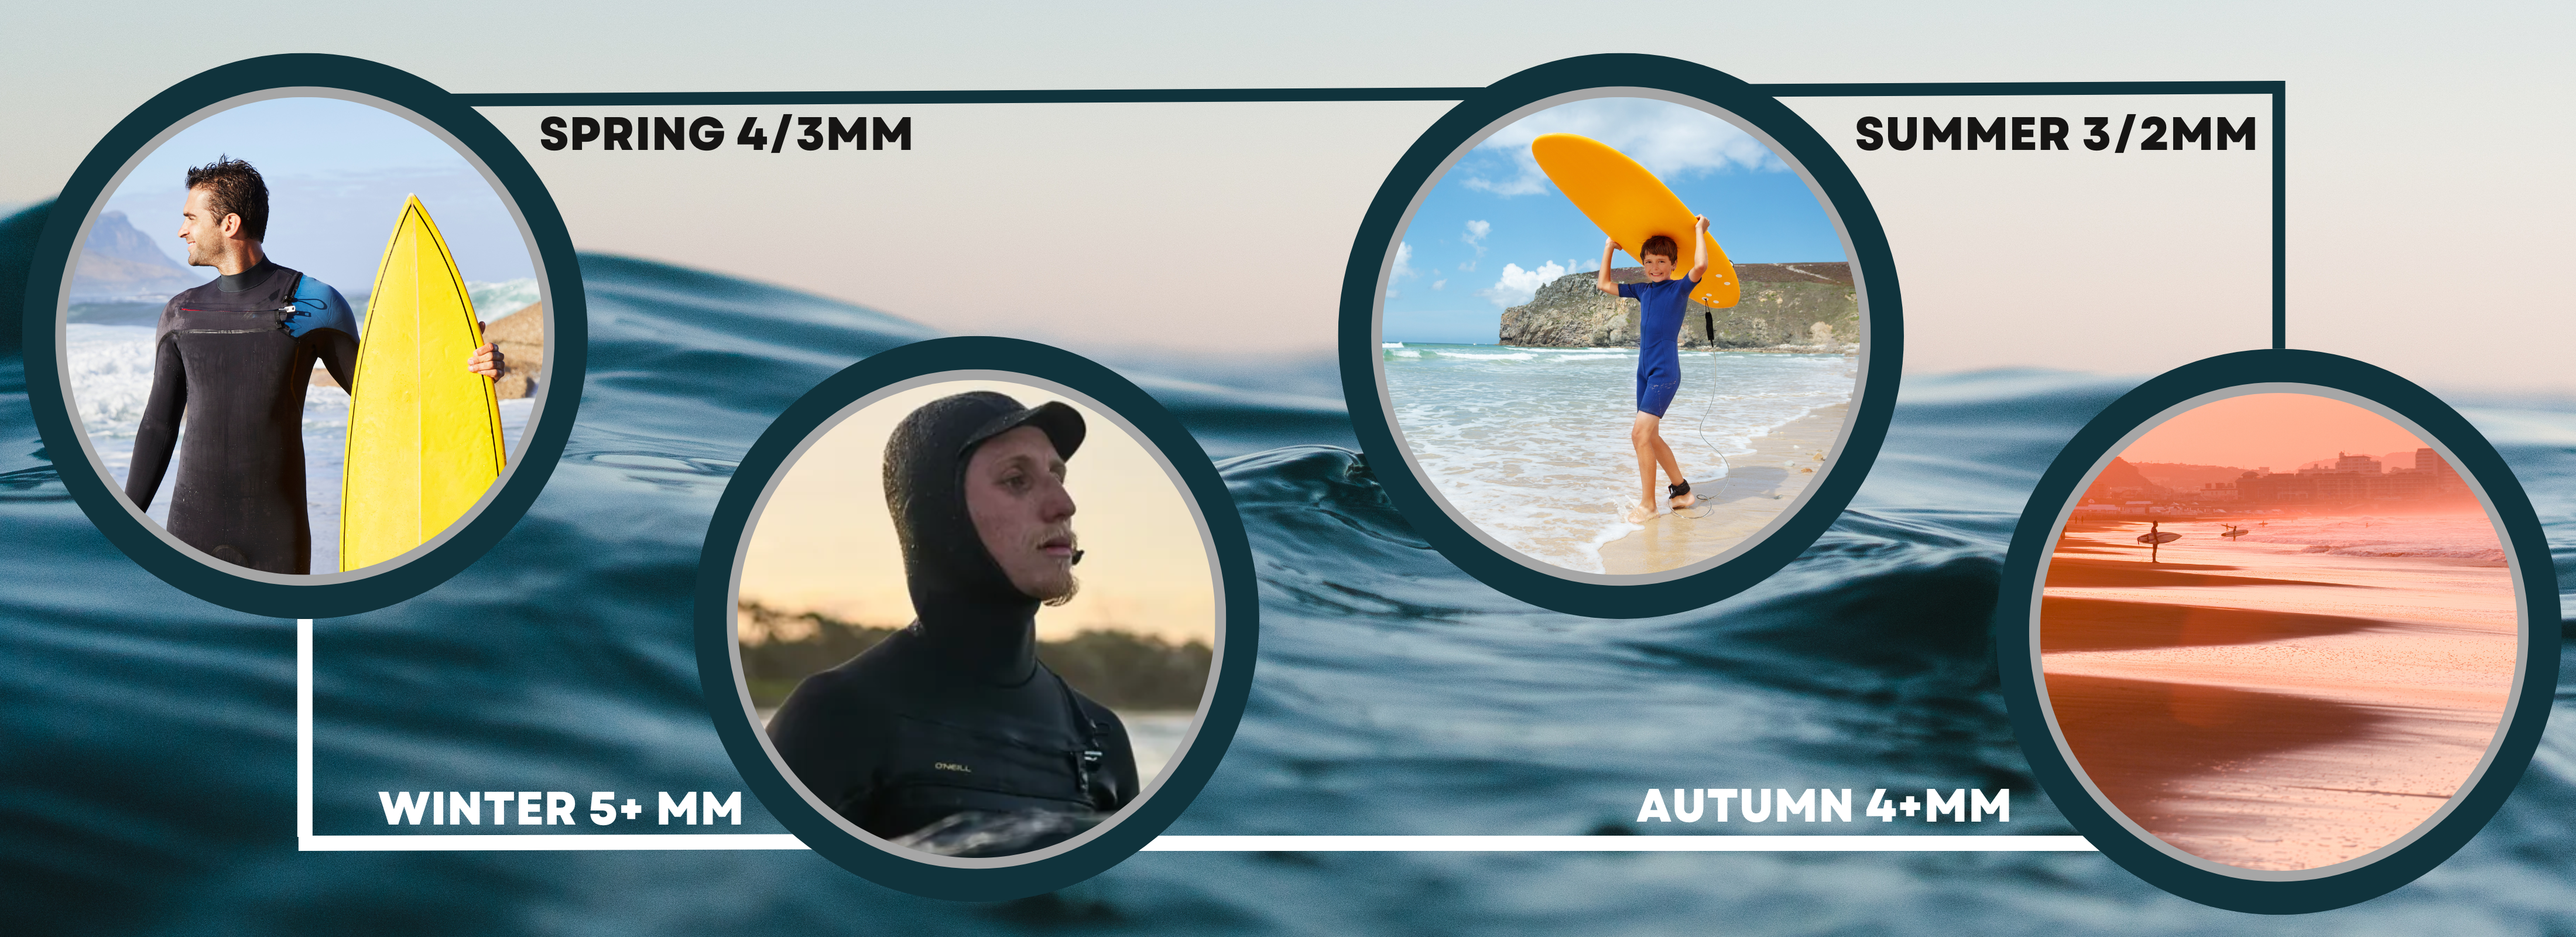 Wetsuits infographic showing the different thicknesses of wetsuit for different seasons